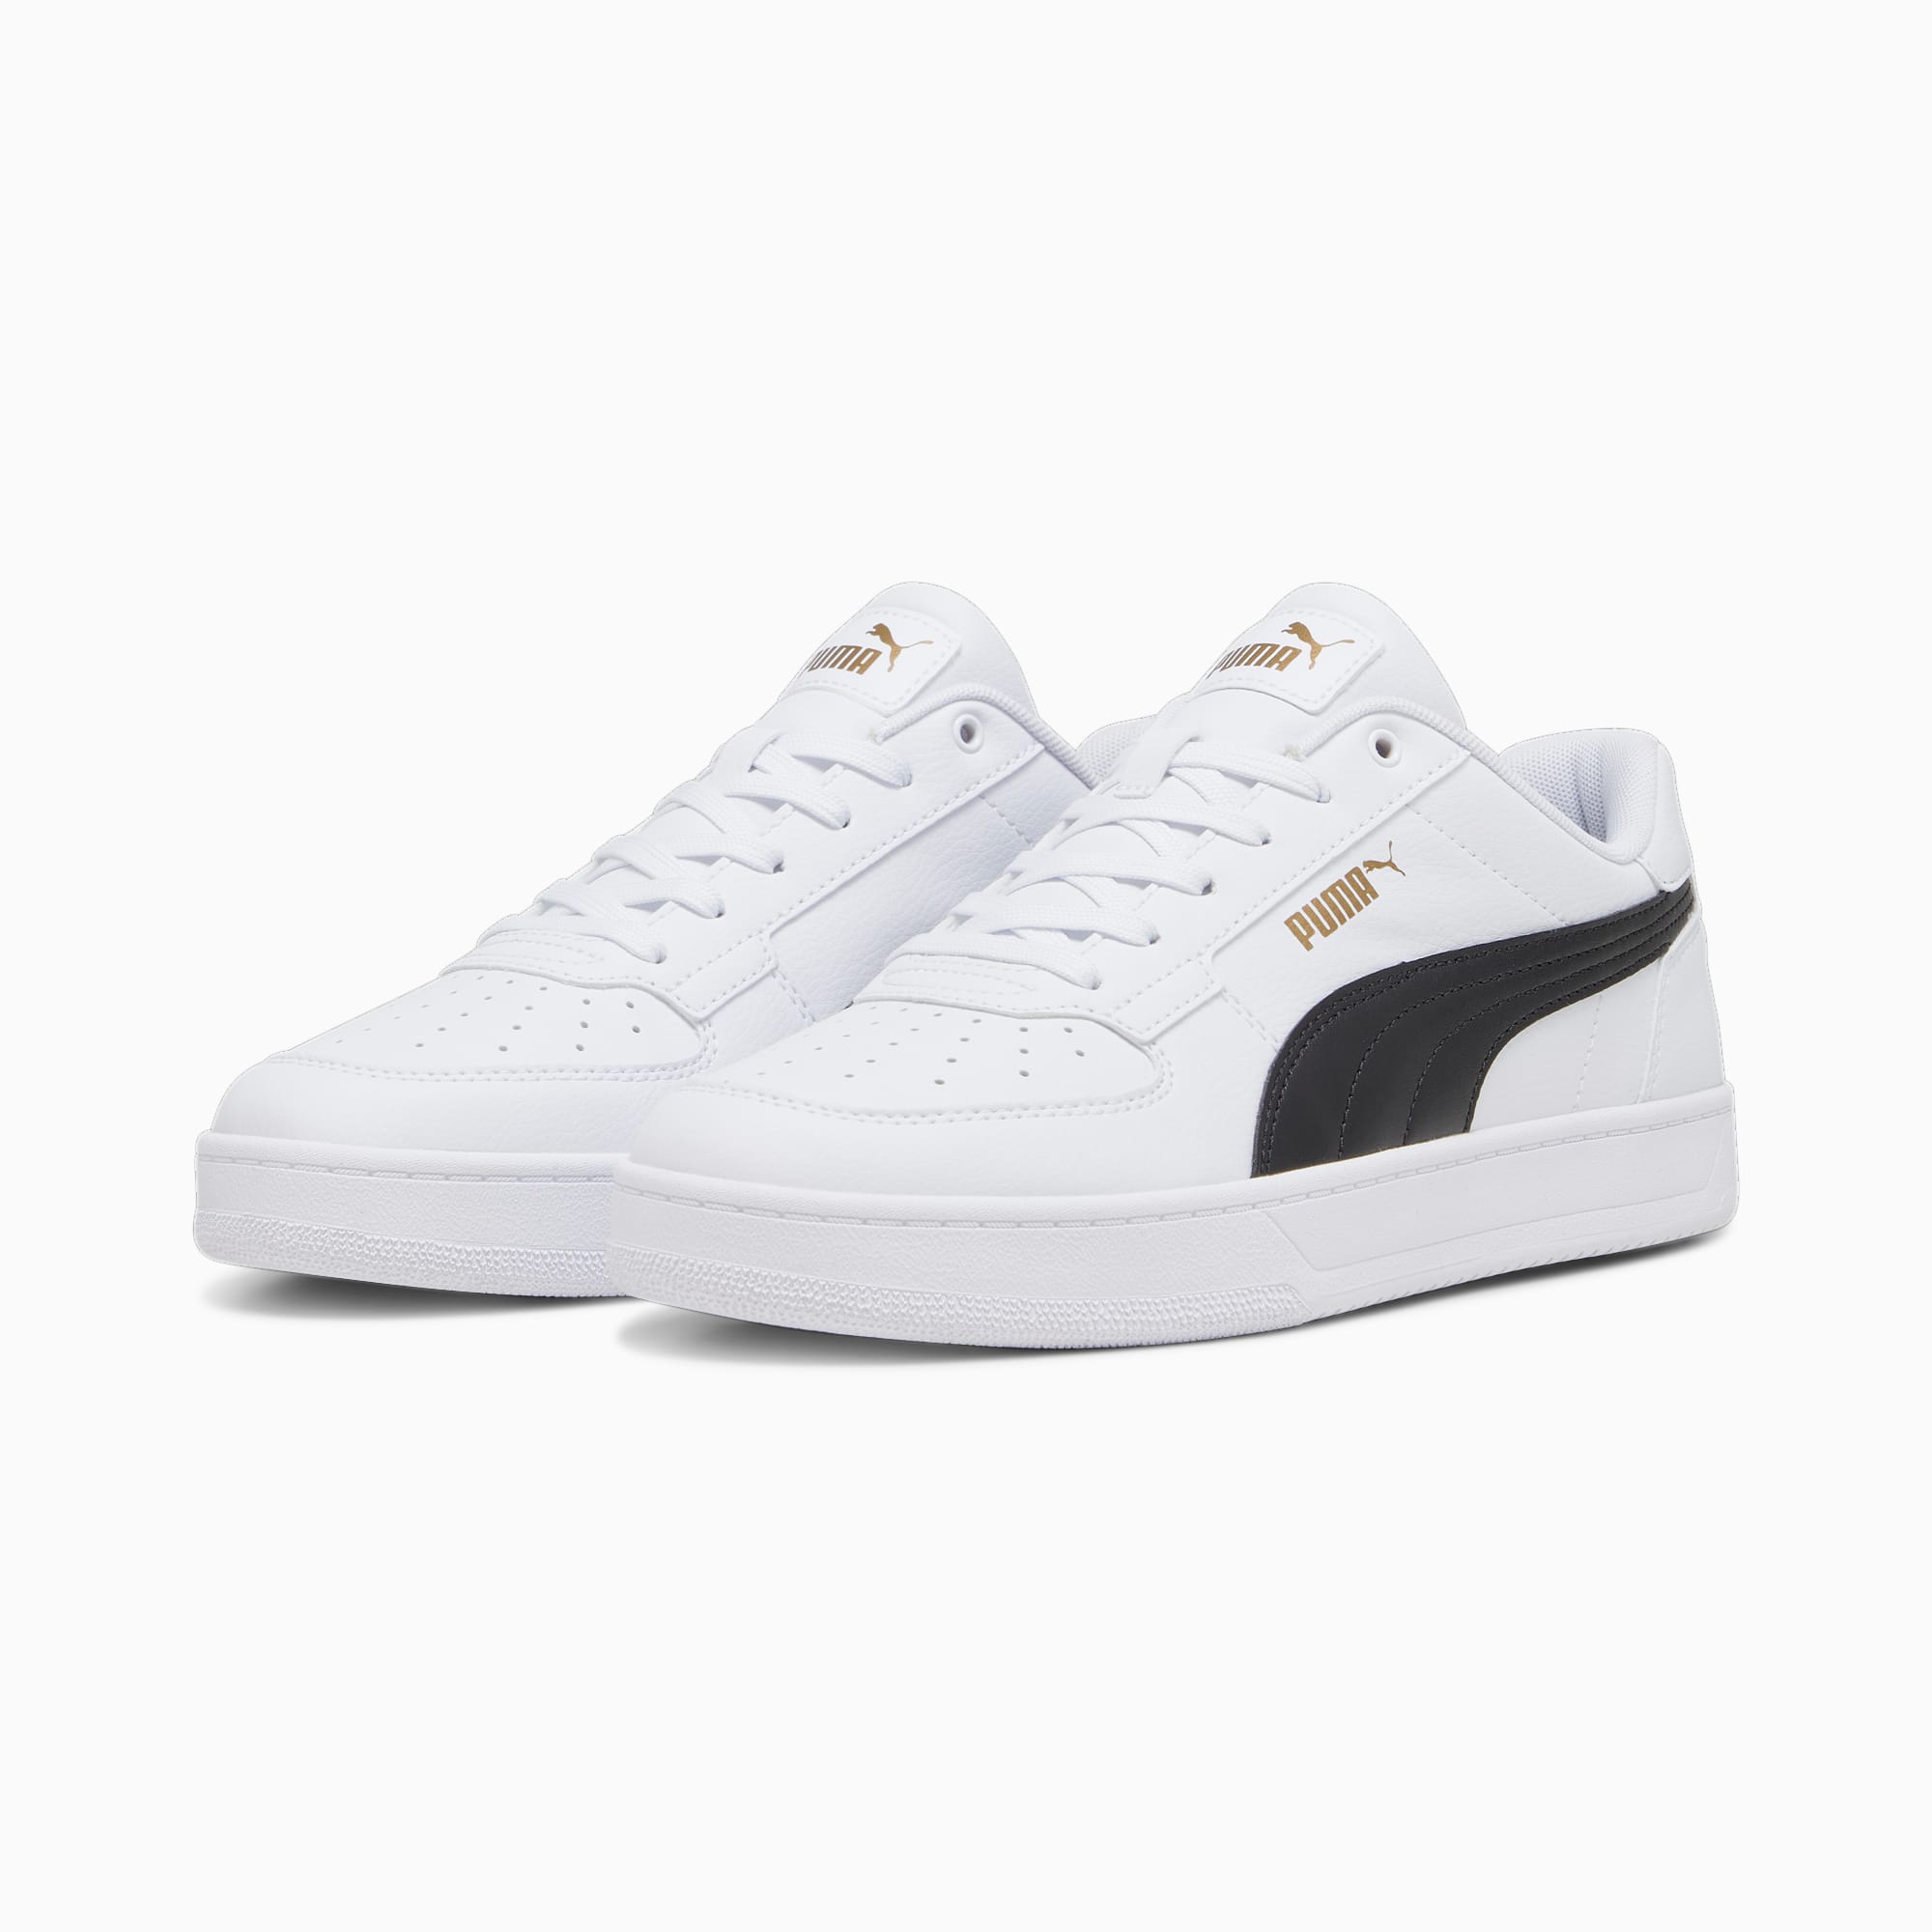 PUMA Chaussure Sneakers Caven 2.0, Or/Noir/Blanc